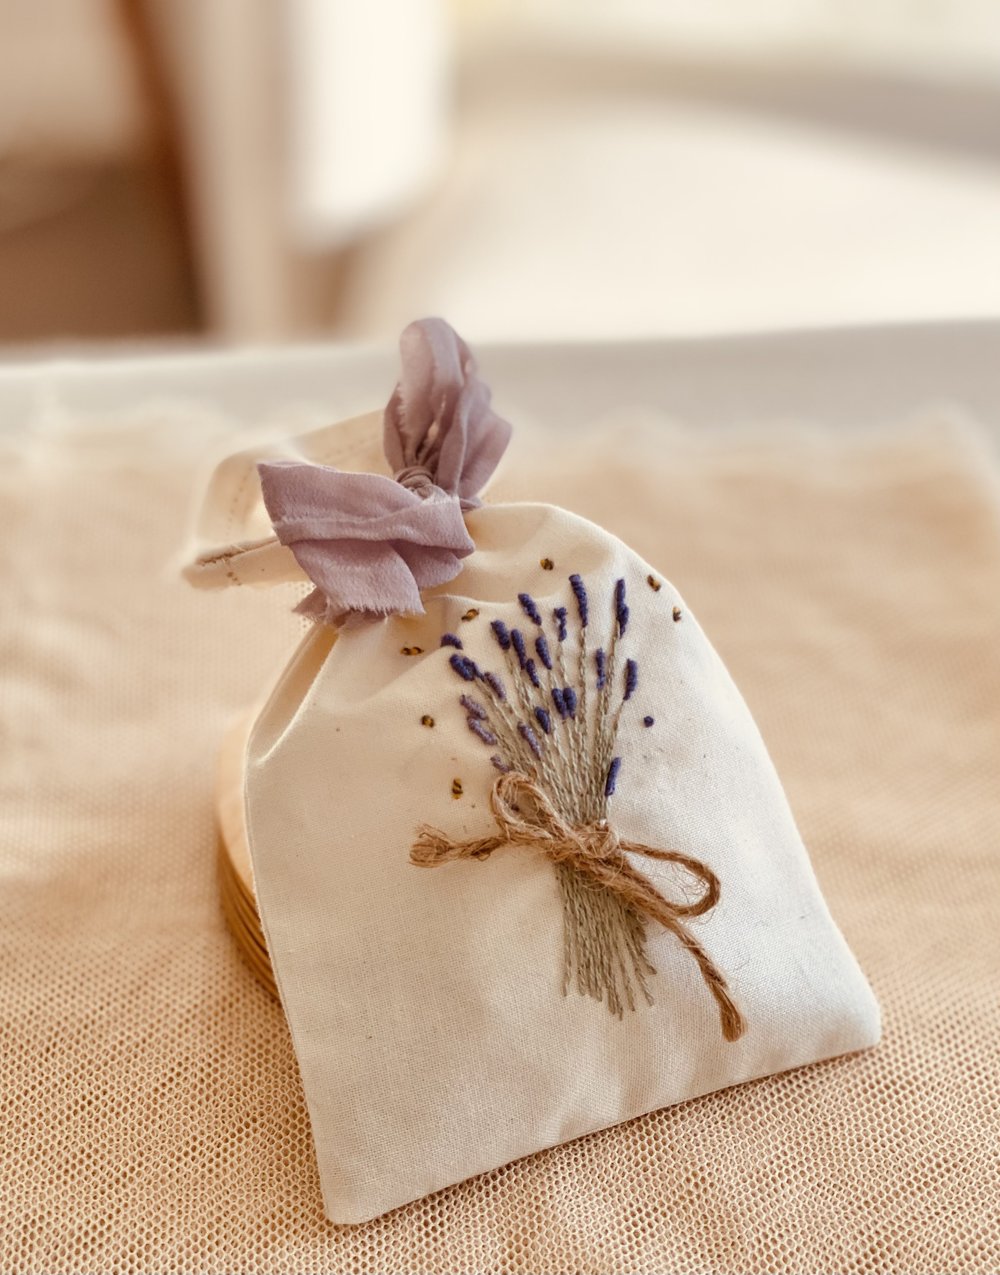 Lavender Printed Embroidery Kits For Beginners